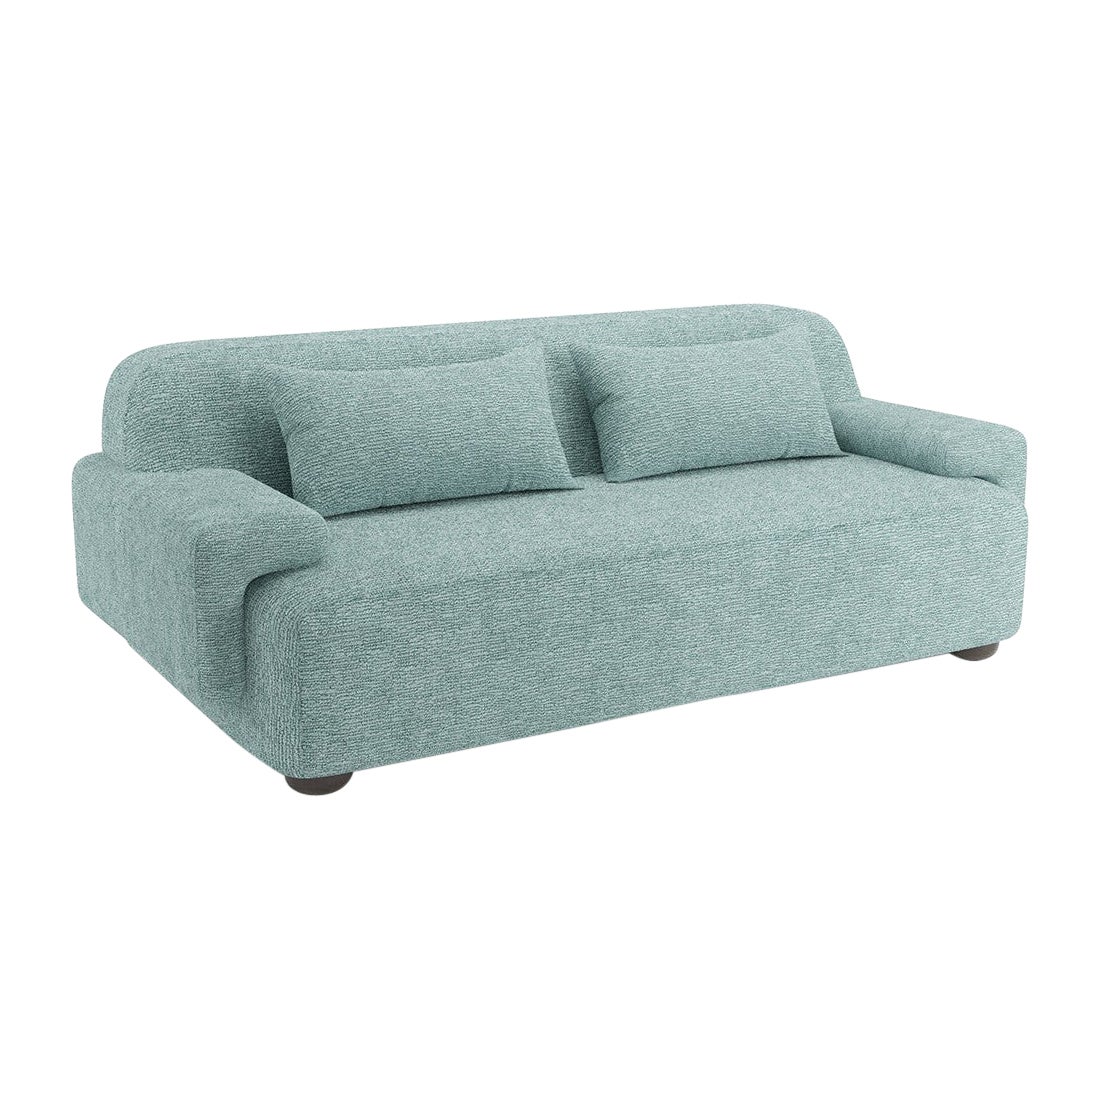 Popus Editions Lena 2.5 Seater Sofa in Mint Megeve Fabric with Knit Effect For Sale